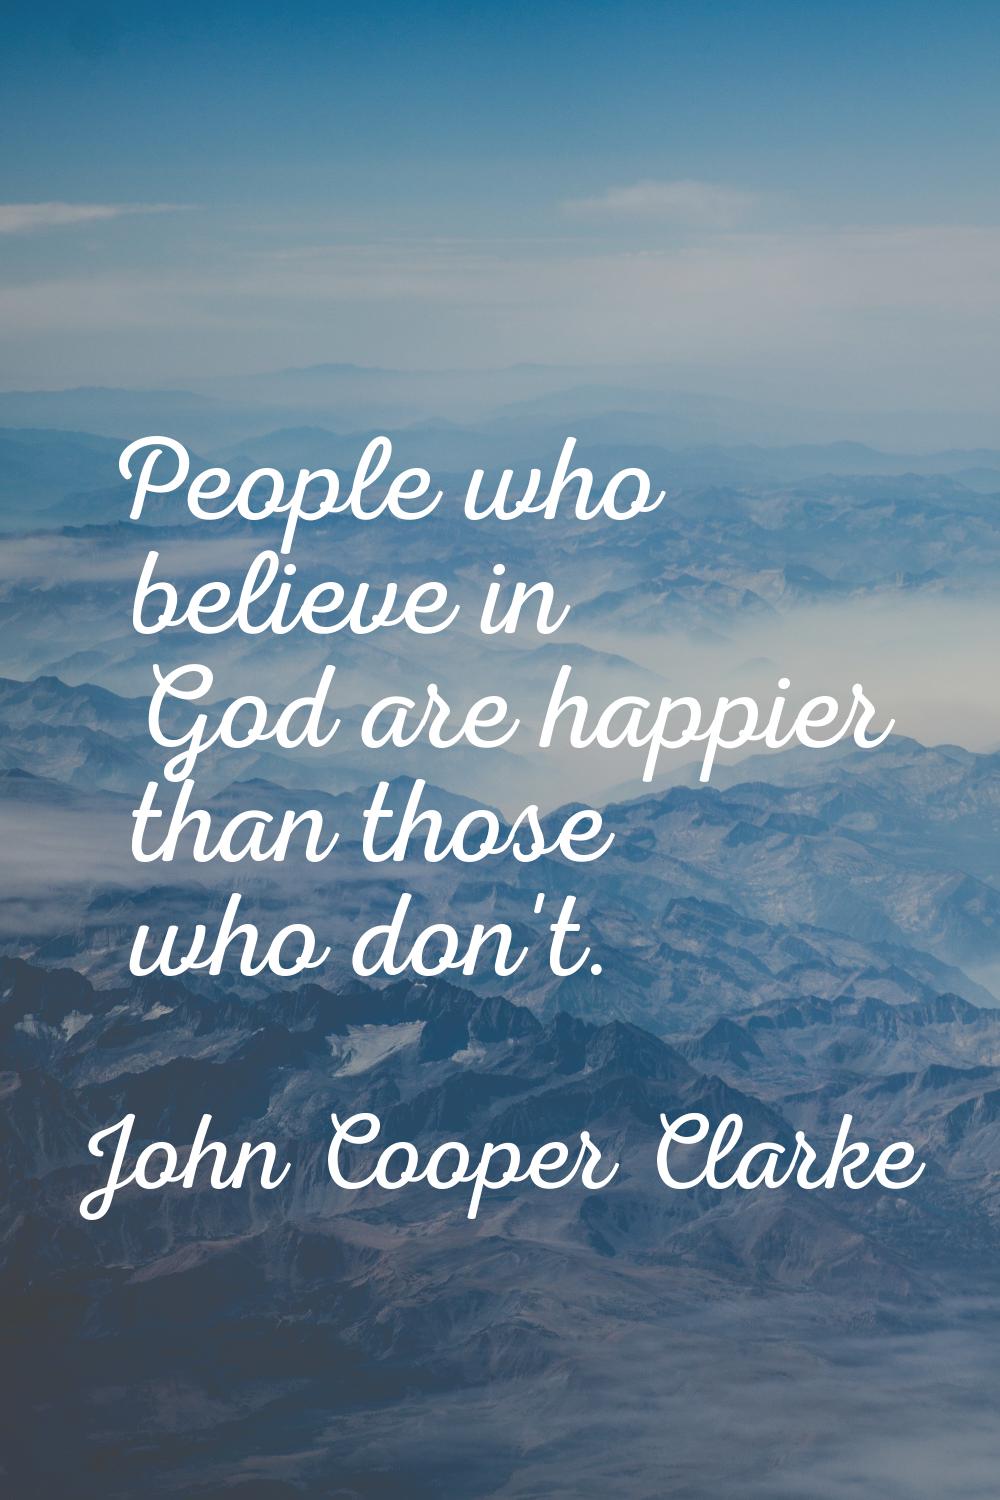 People who believe in God are happier than those who don't.